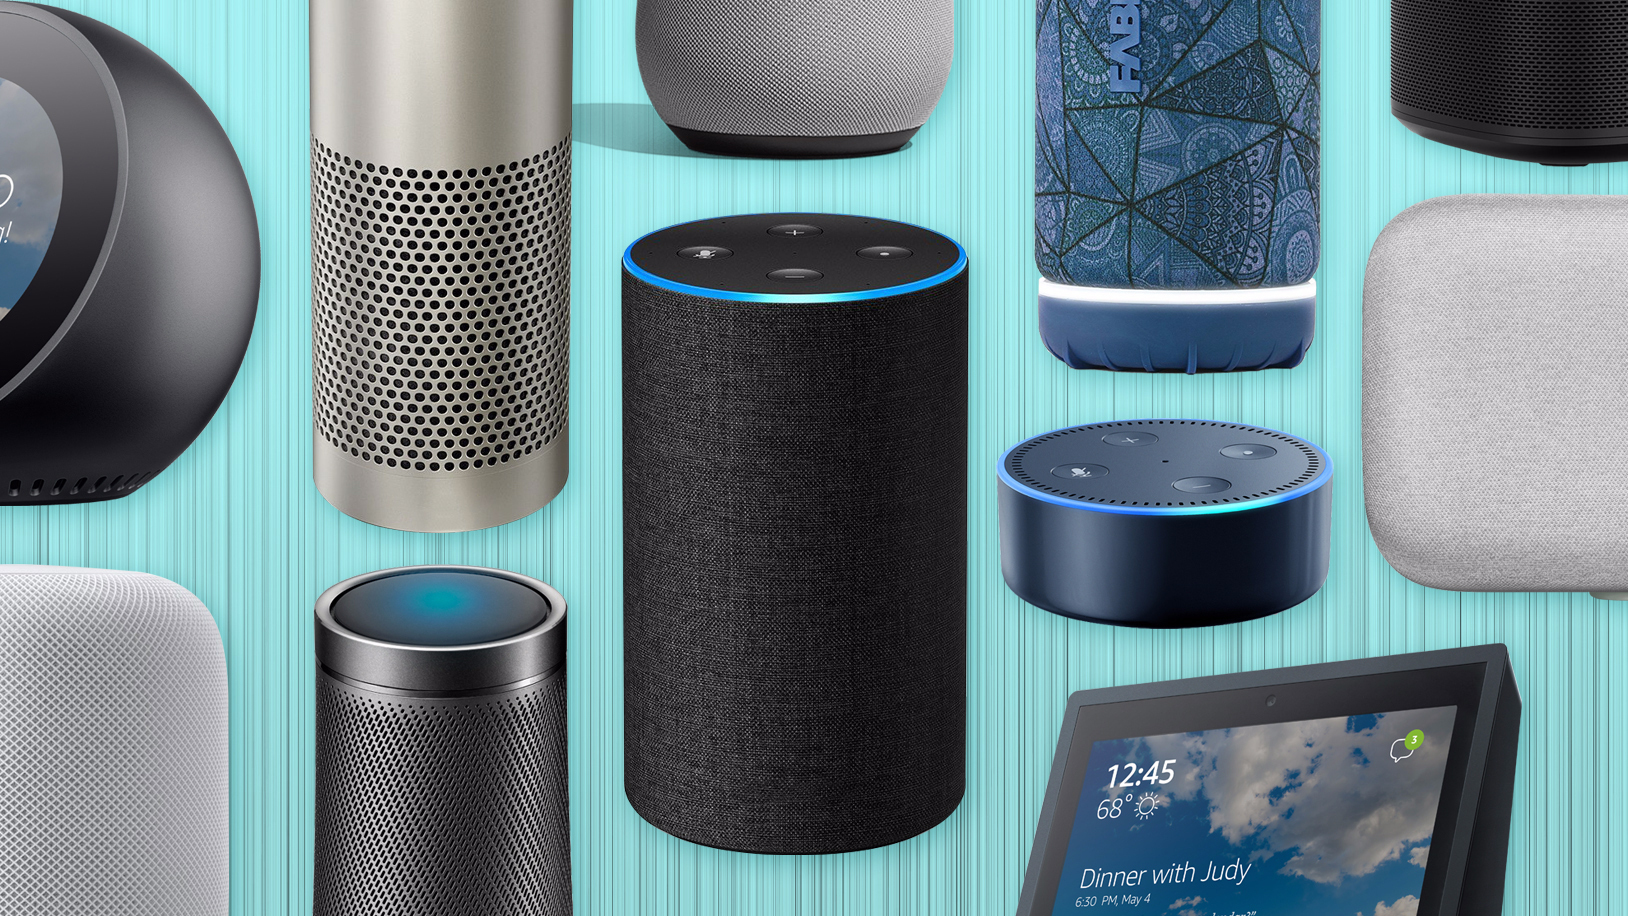 Transparency Market Researchs report sees the global smart speaker market rising